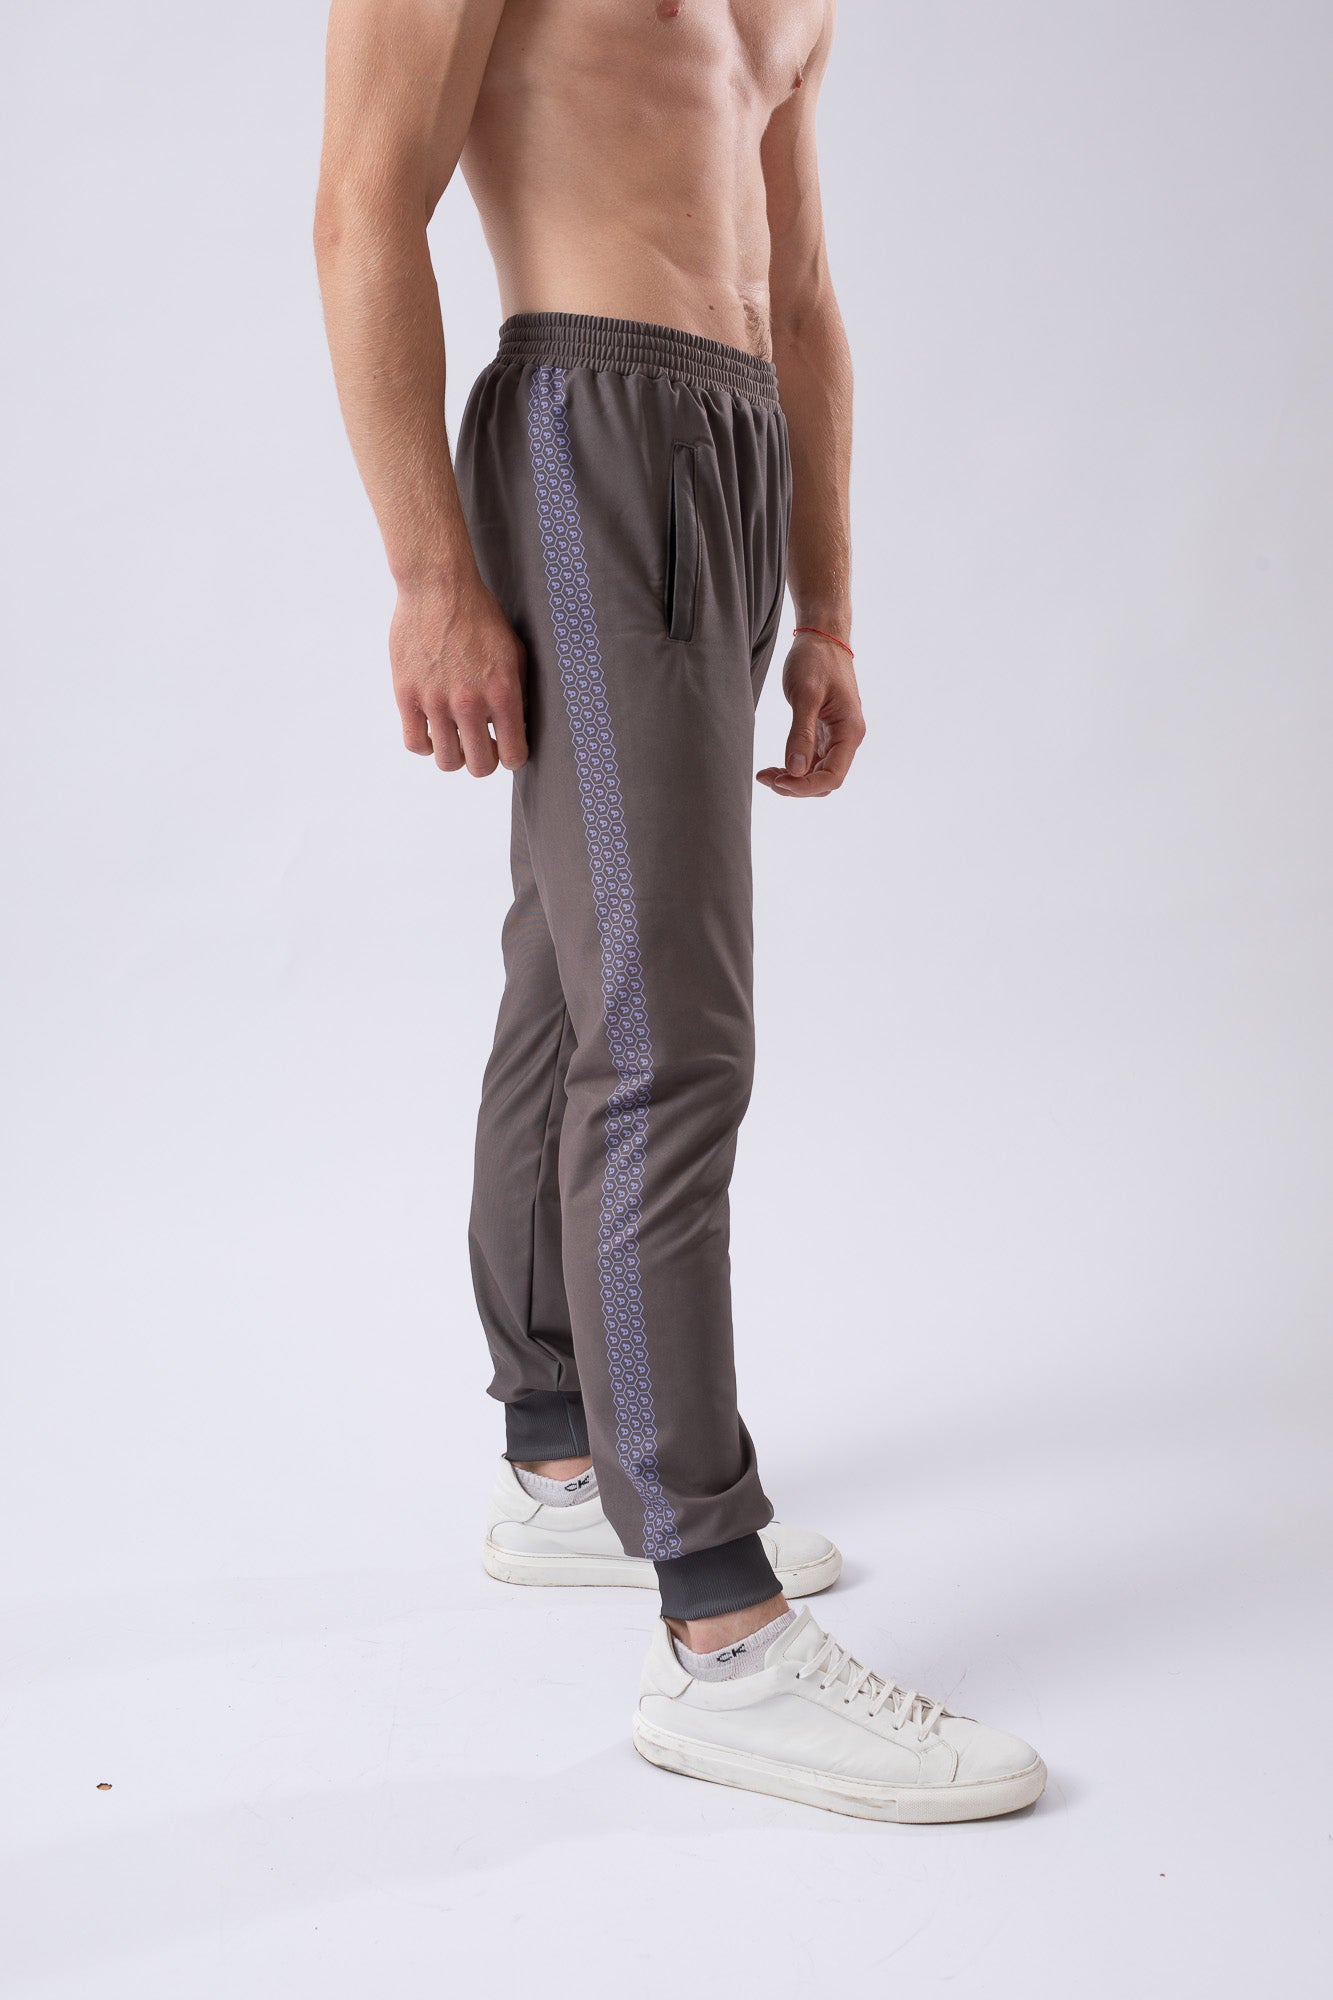 CoreD Pro Tracksuit Pants - Men's - Very Peri Collection